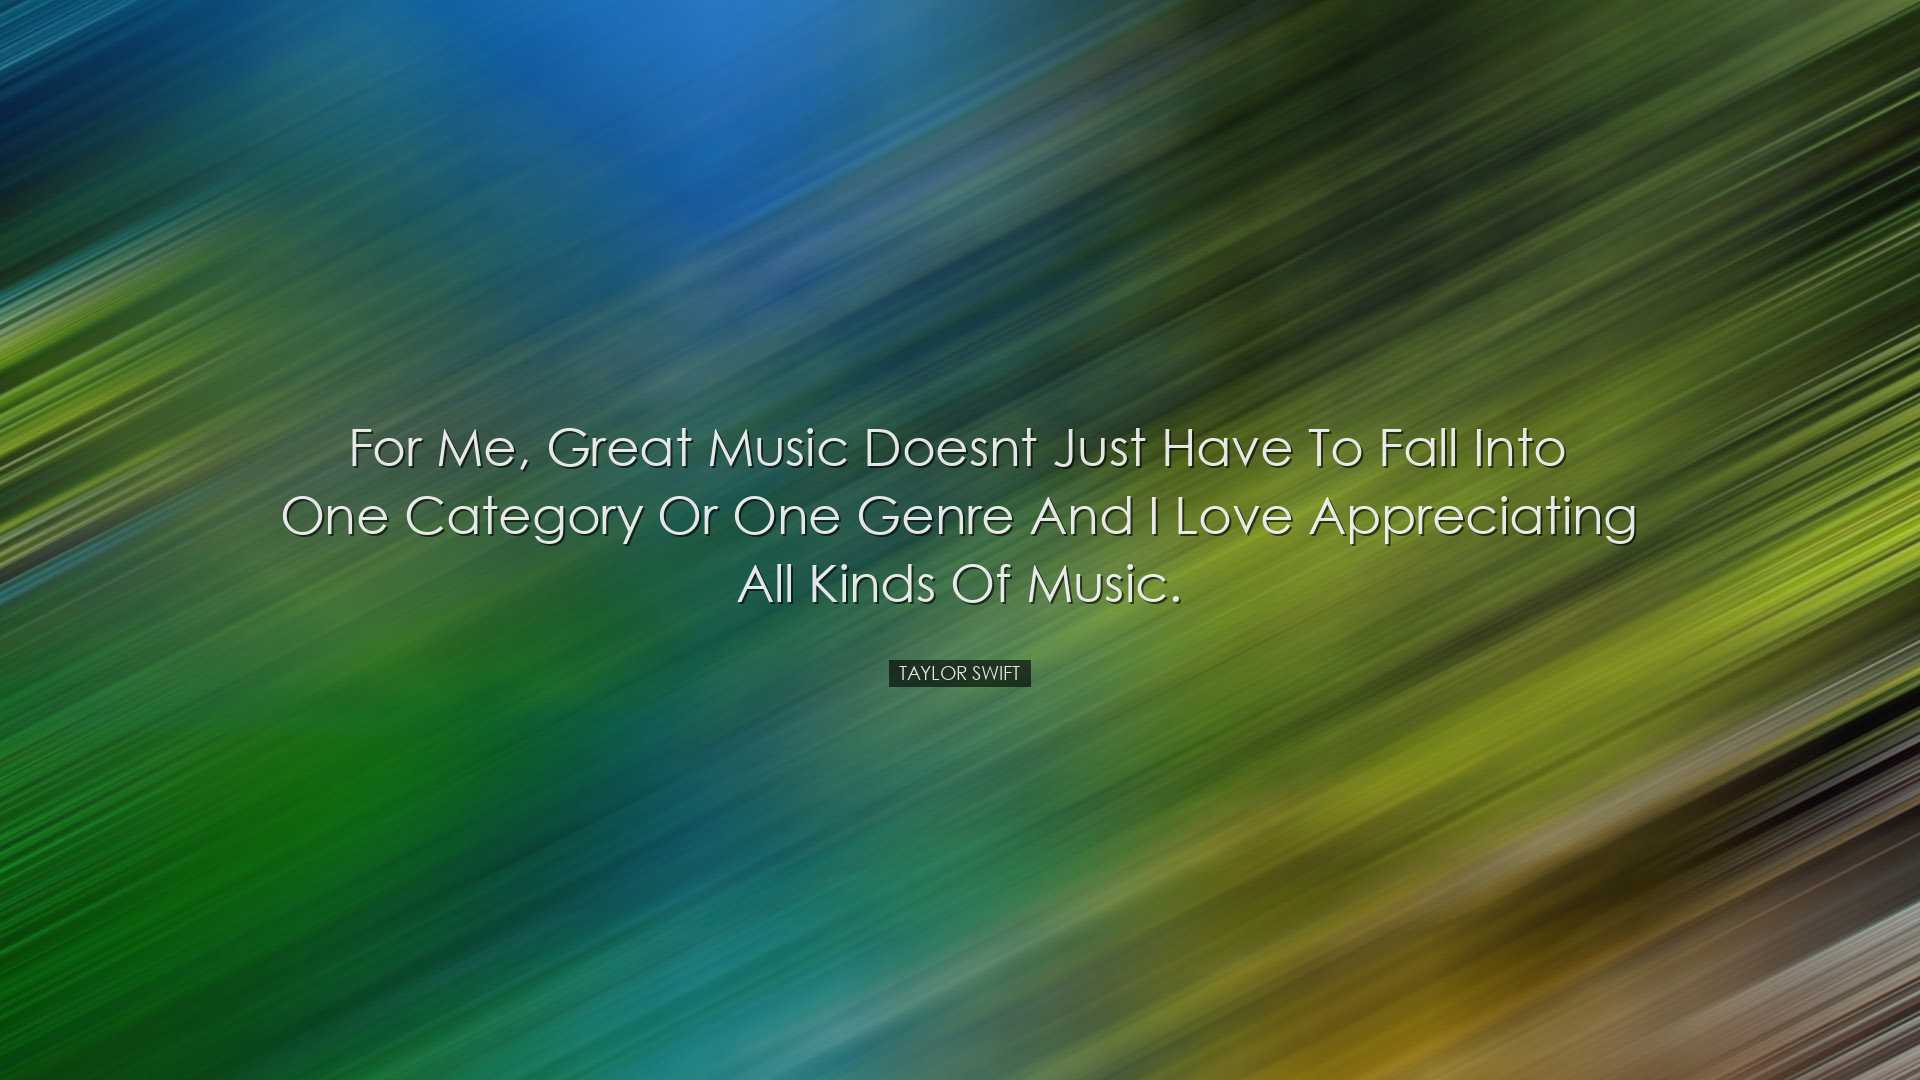 For me, great music doesnt just have to fall into one category or